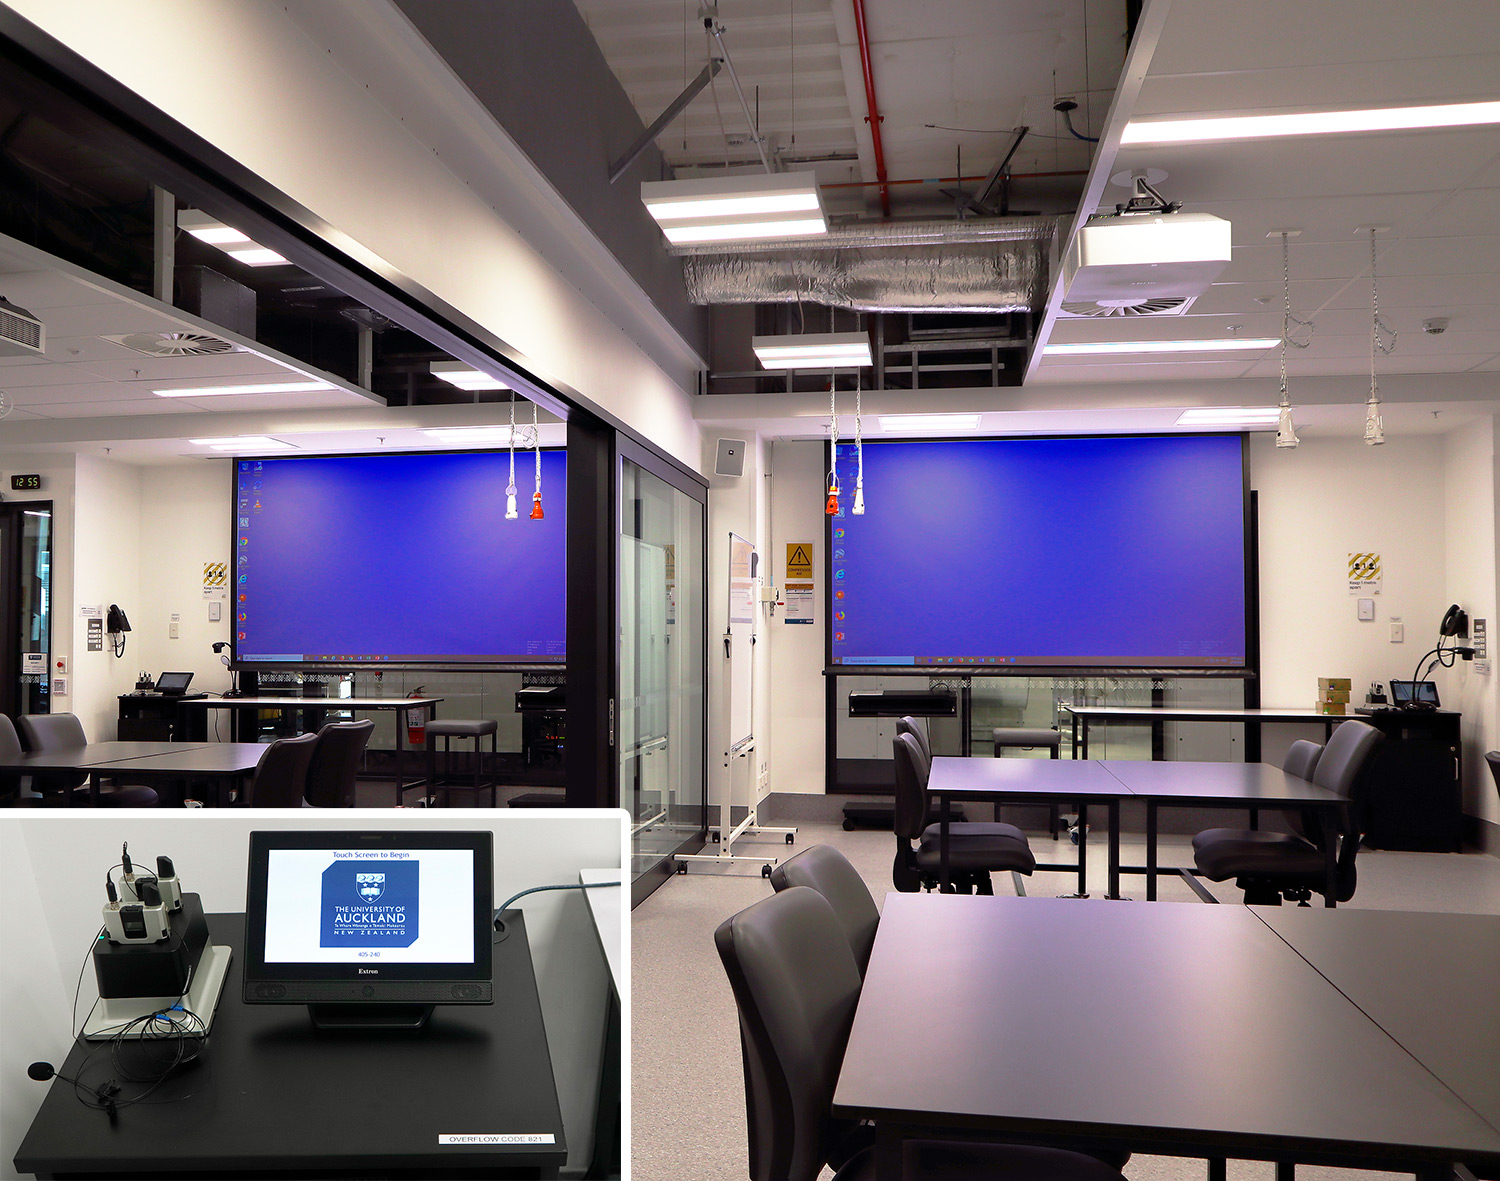 Thumbnail image of Learning Space classroom